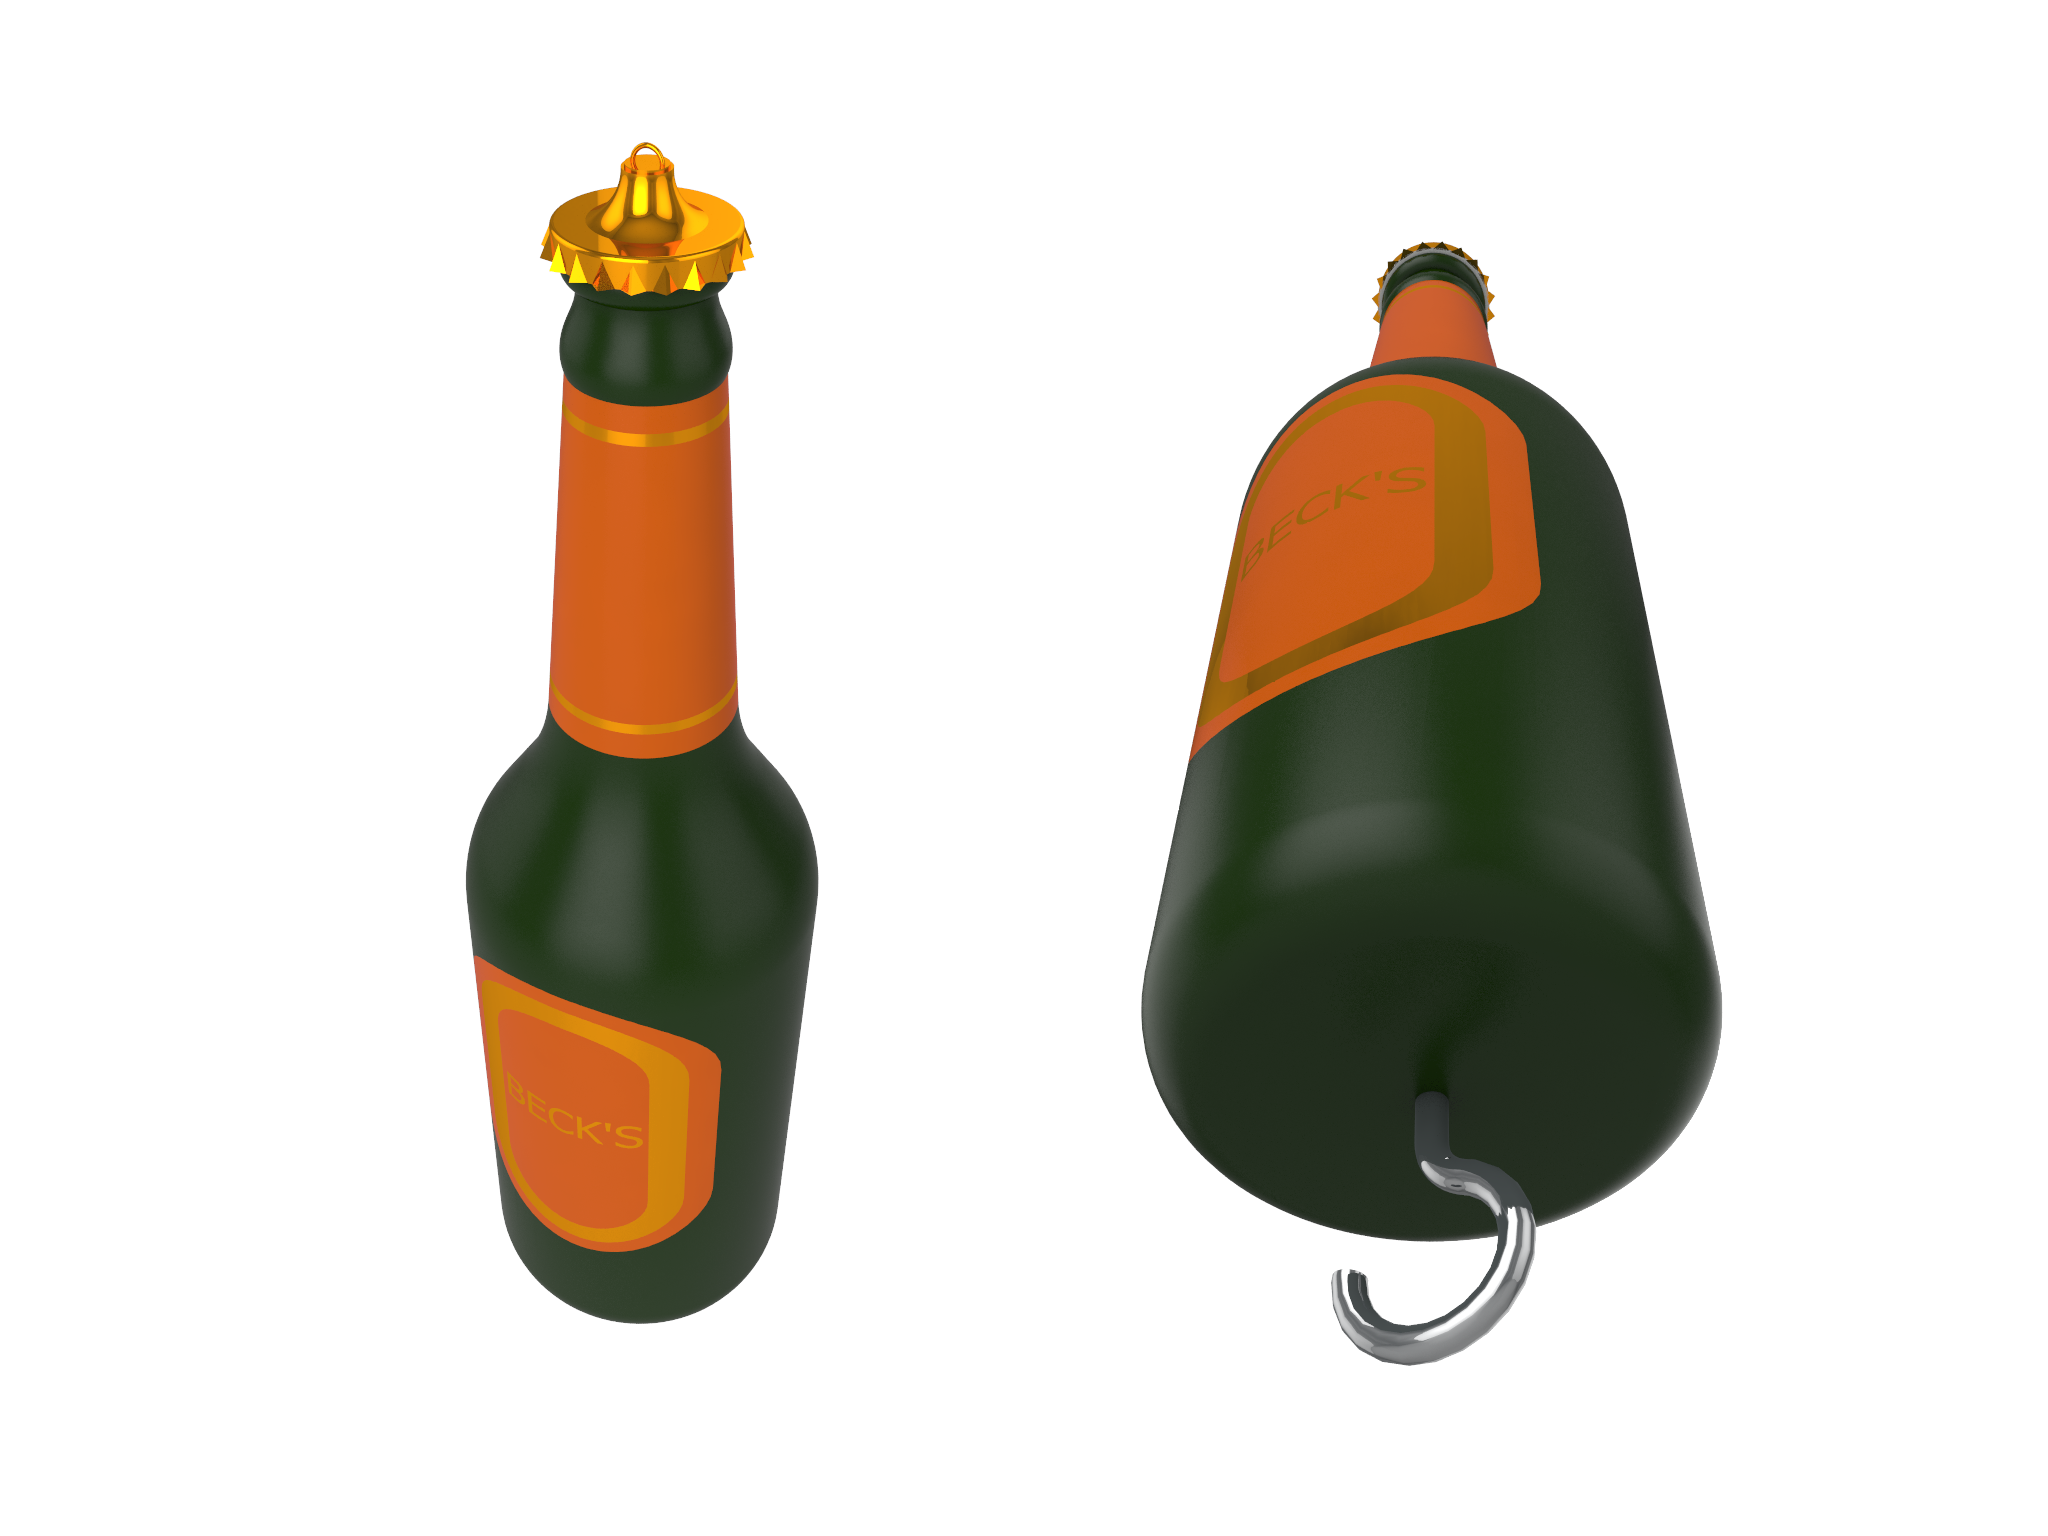 The Beer Bottle Bobber is a novelty fishing invention that gives a lure a new shape to look like a beer bottle.